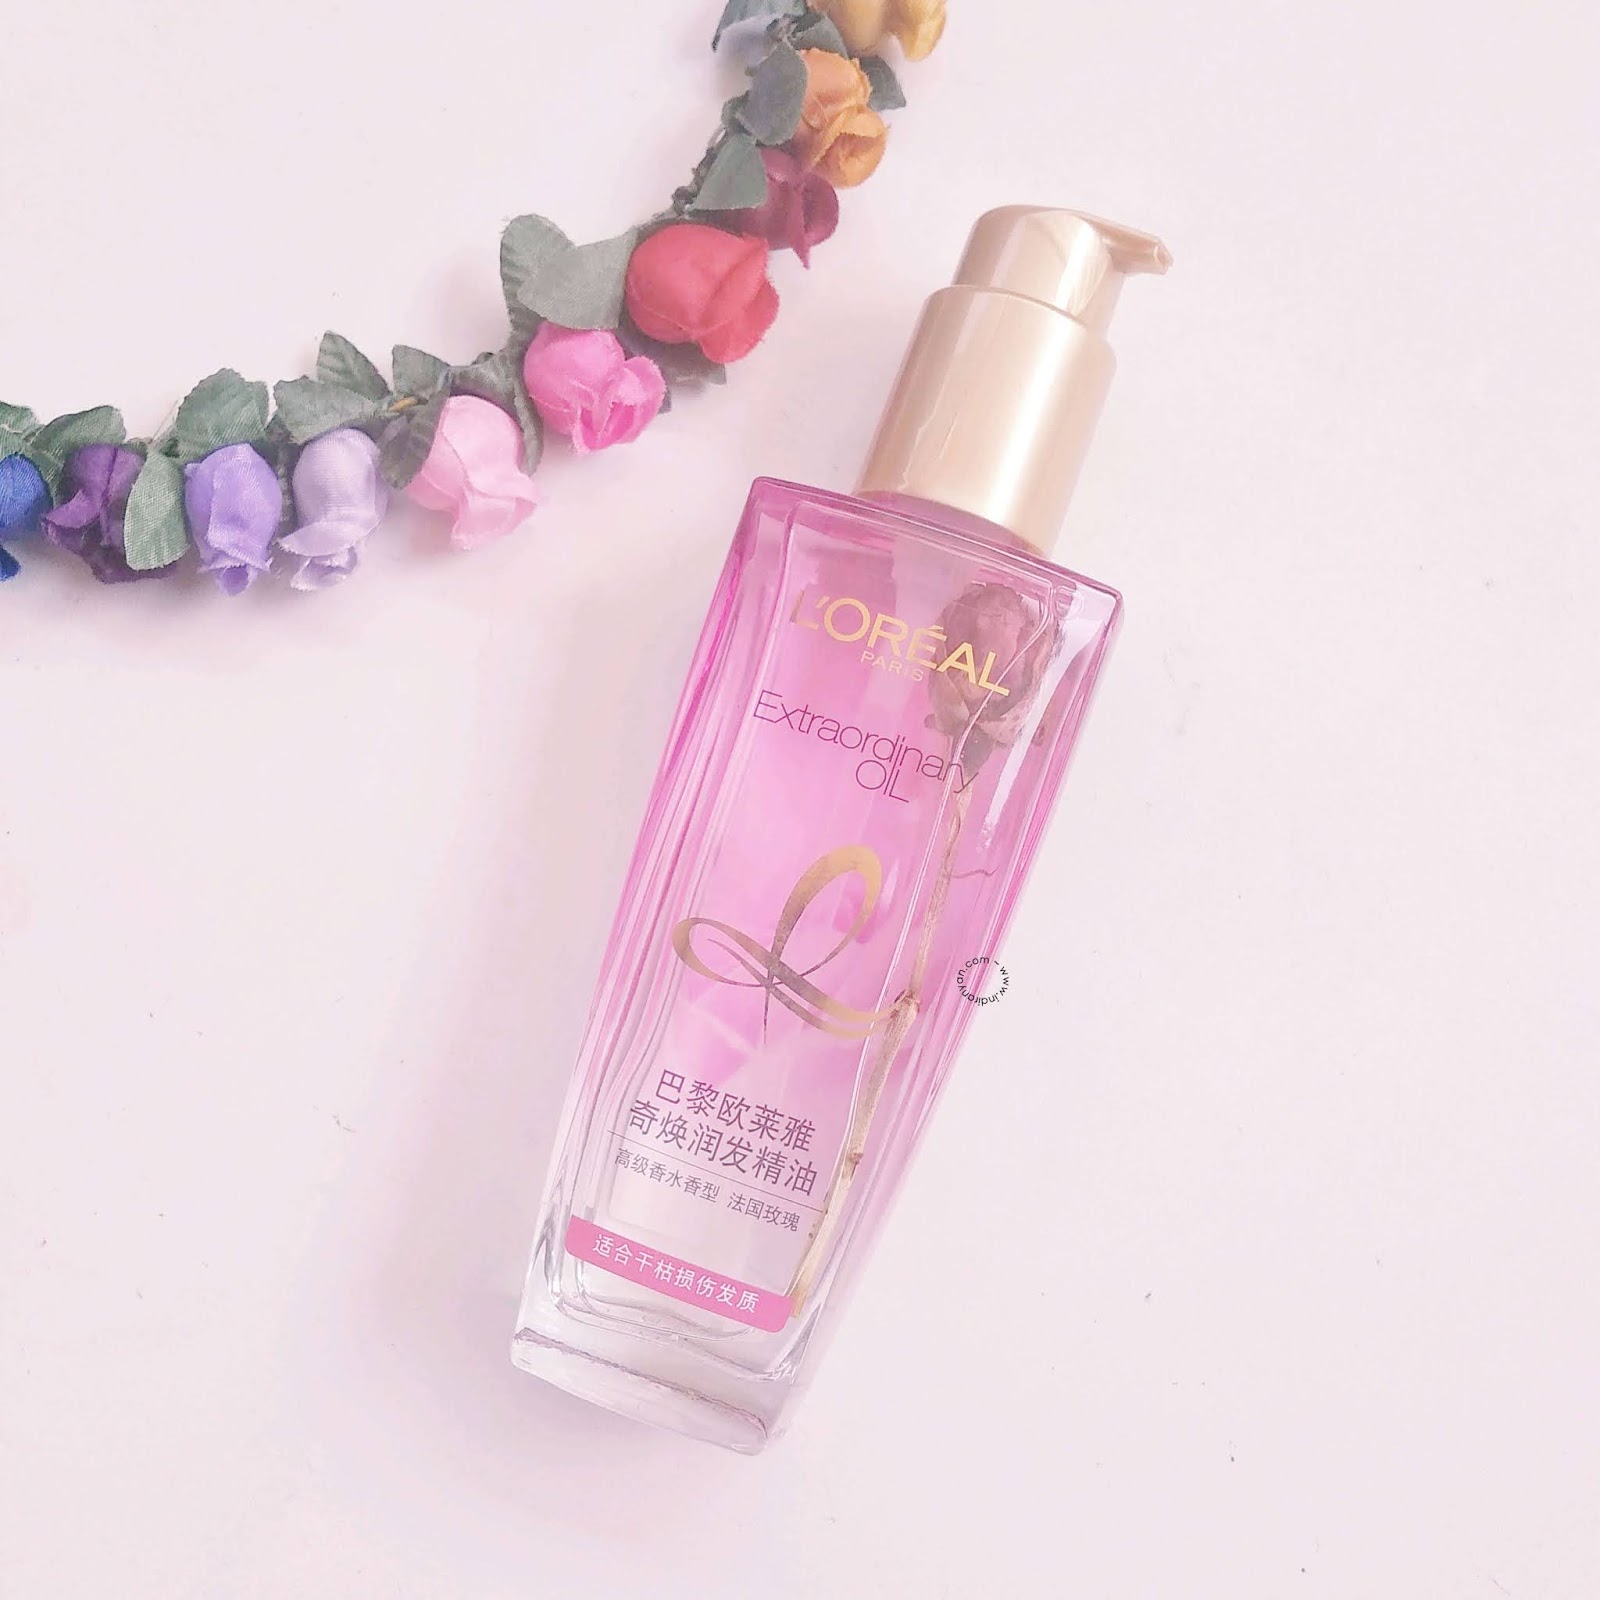 loreal-extraordinary-oil-floral-rose